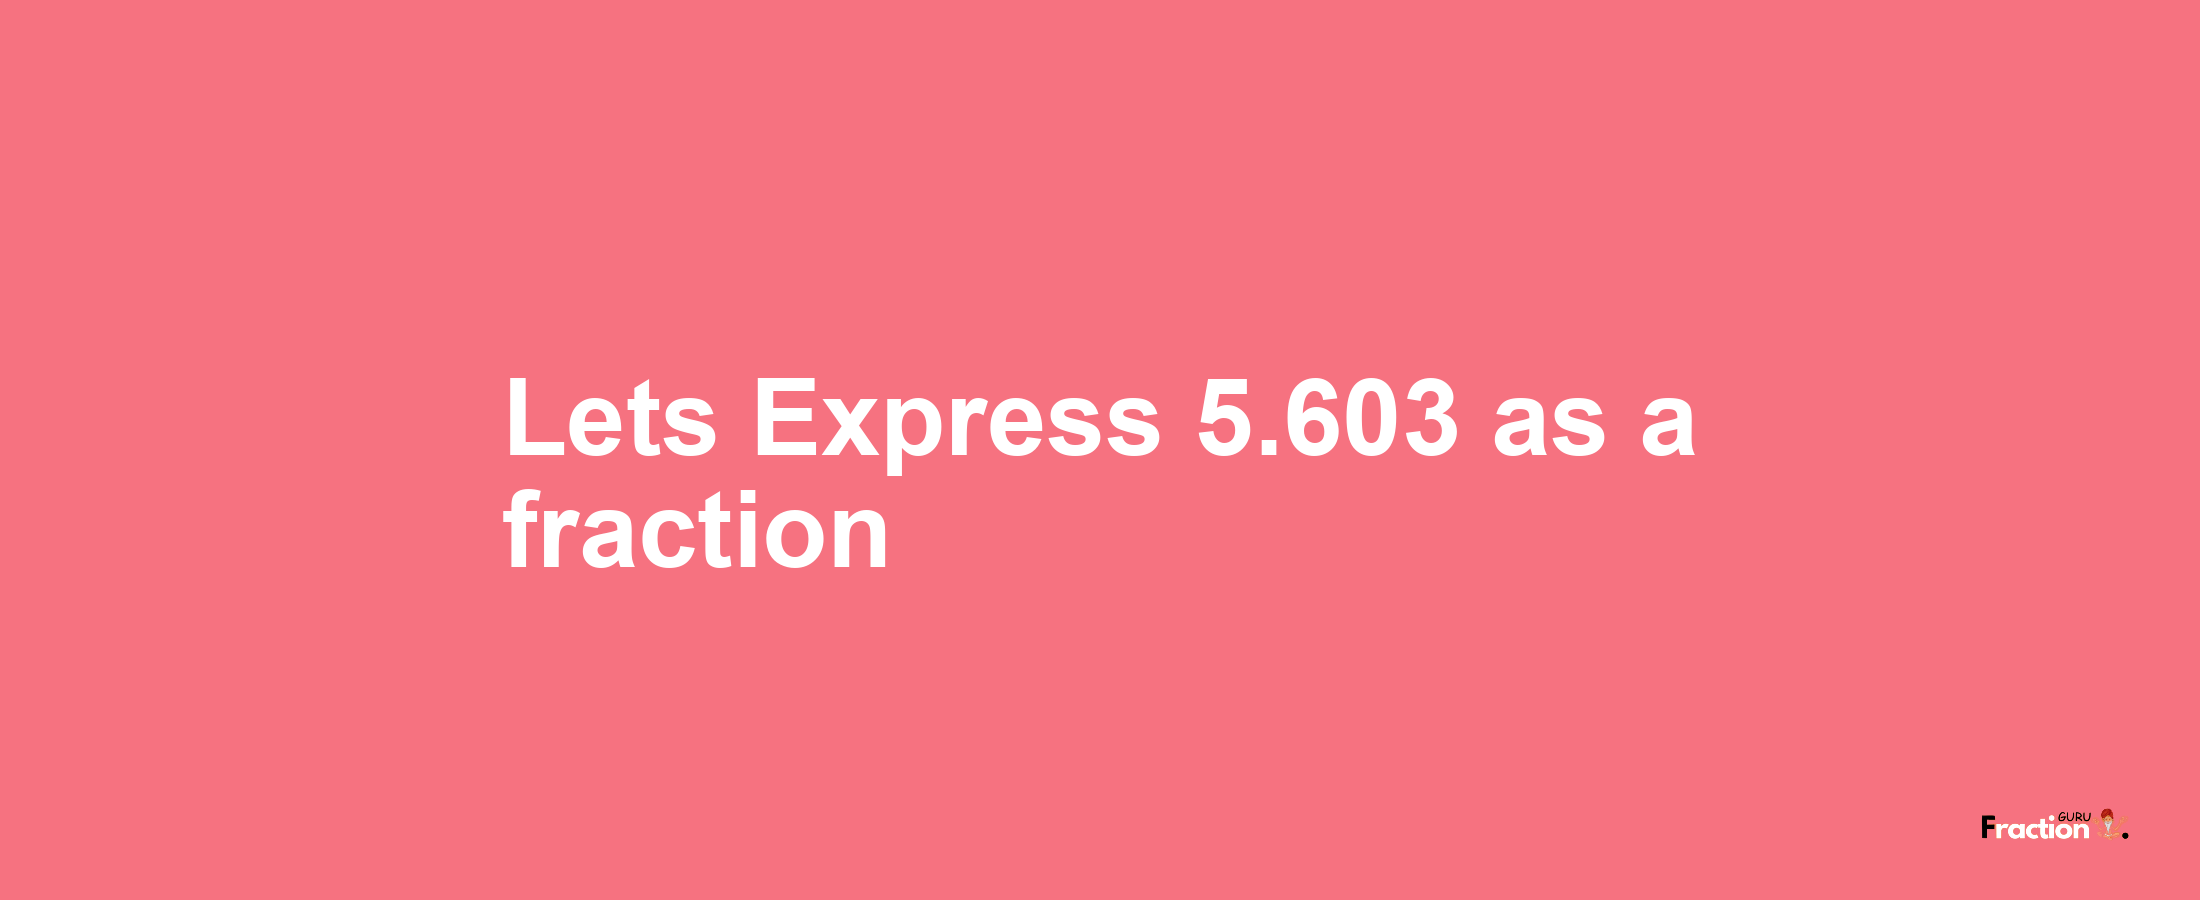 Lets Express 5.603 as afraction